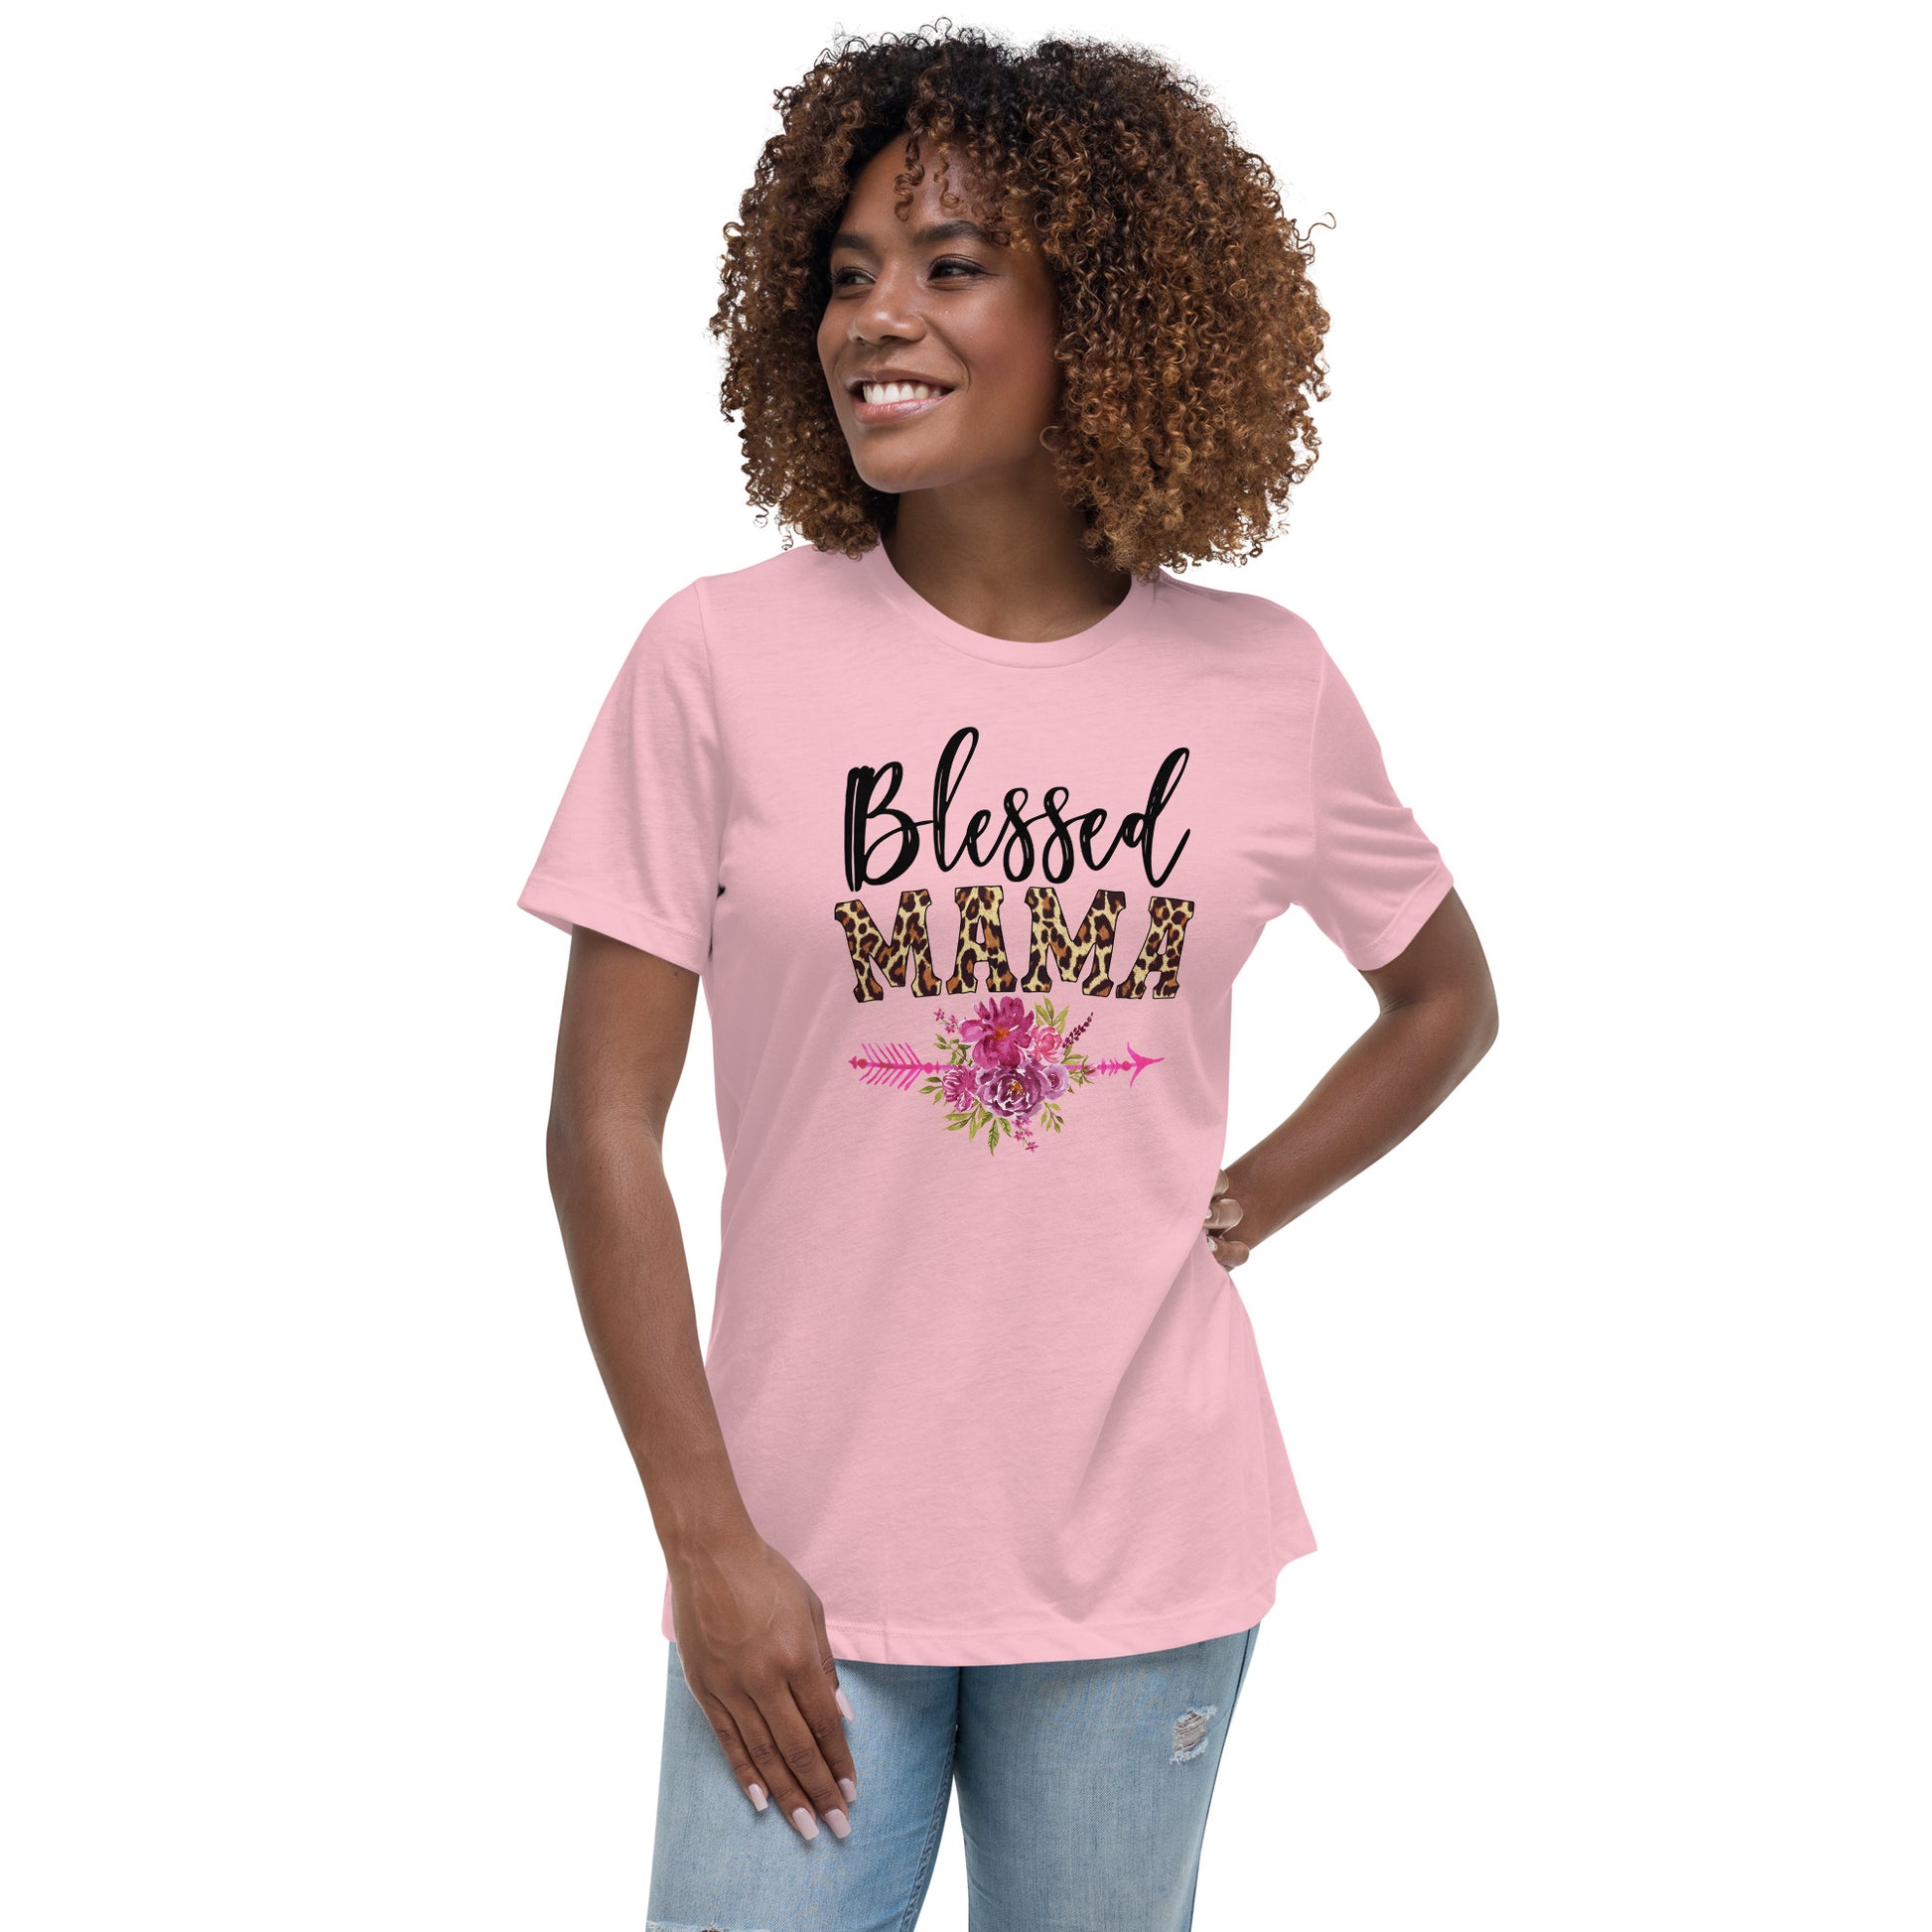 Blessed Mamma Women's Relaxed T-Shirt CedarHill Country Market